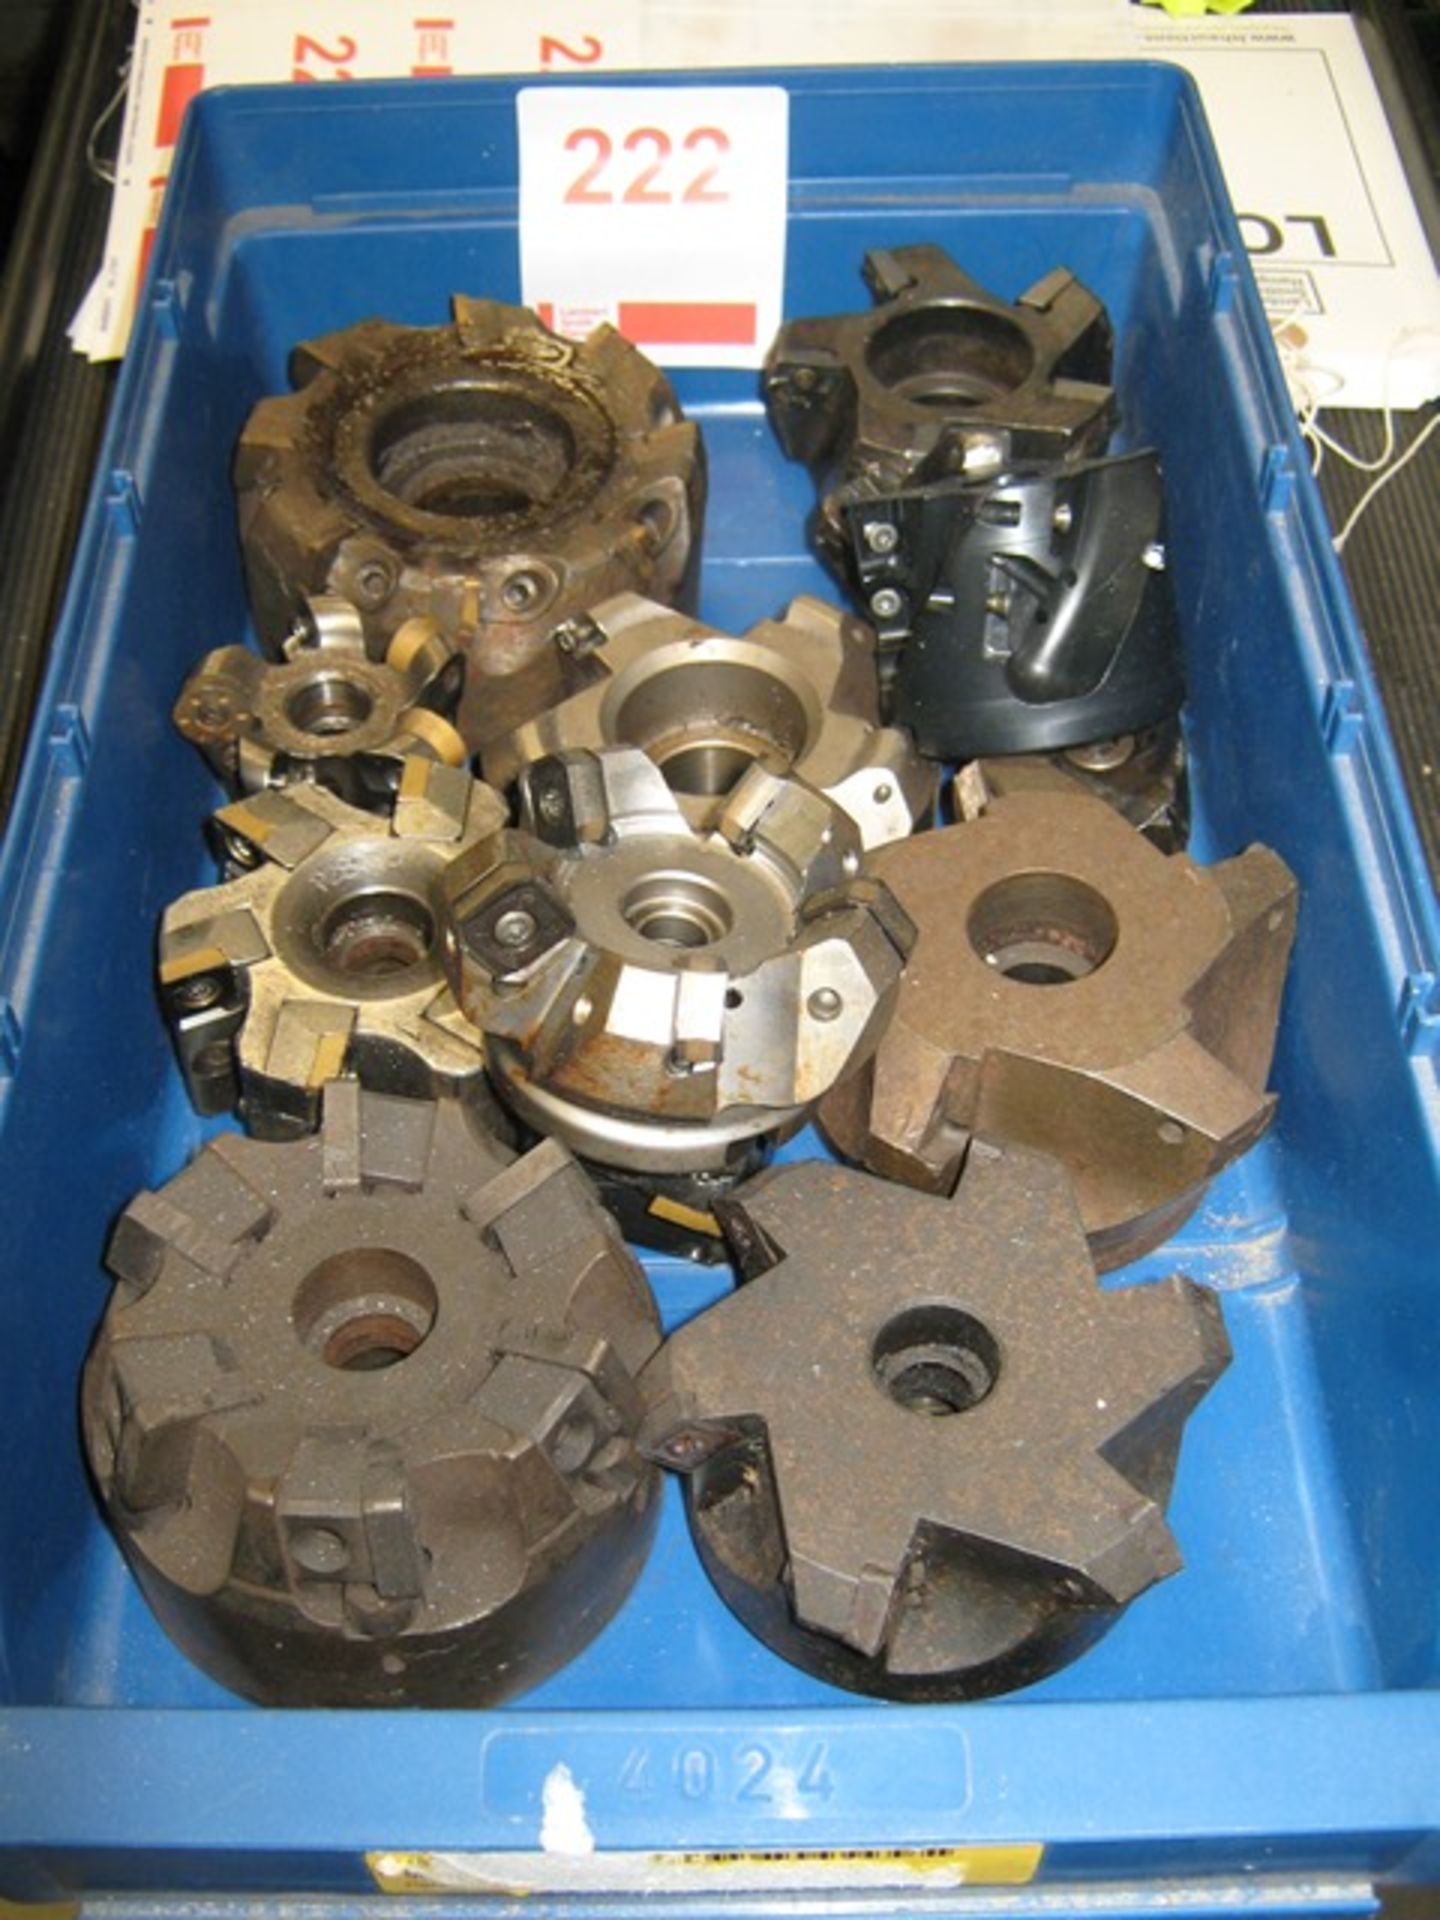 Tipped Milling Cutters